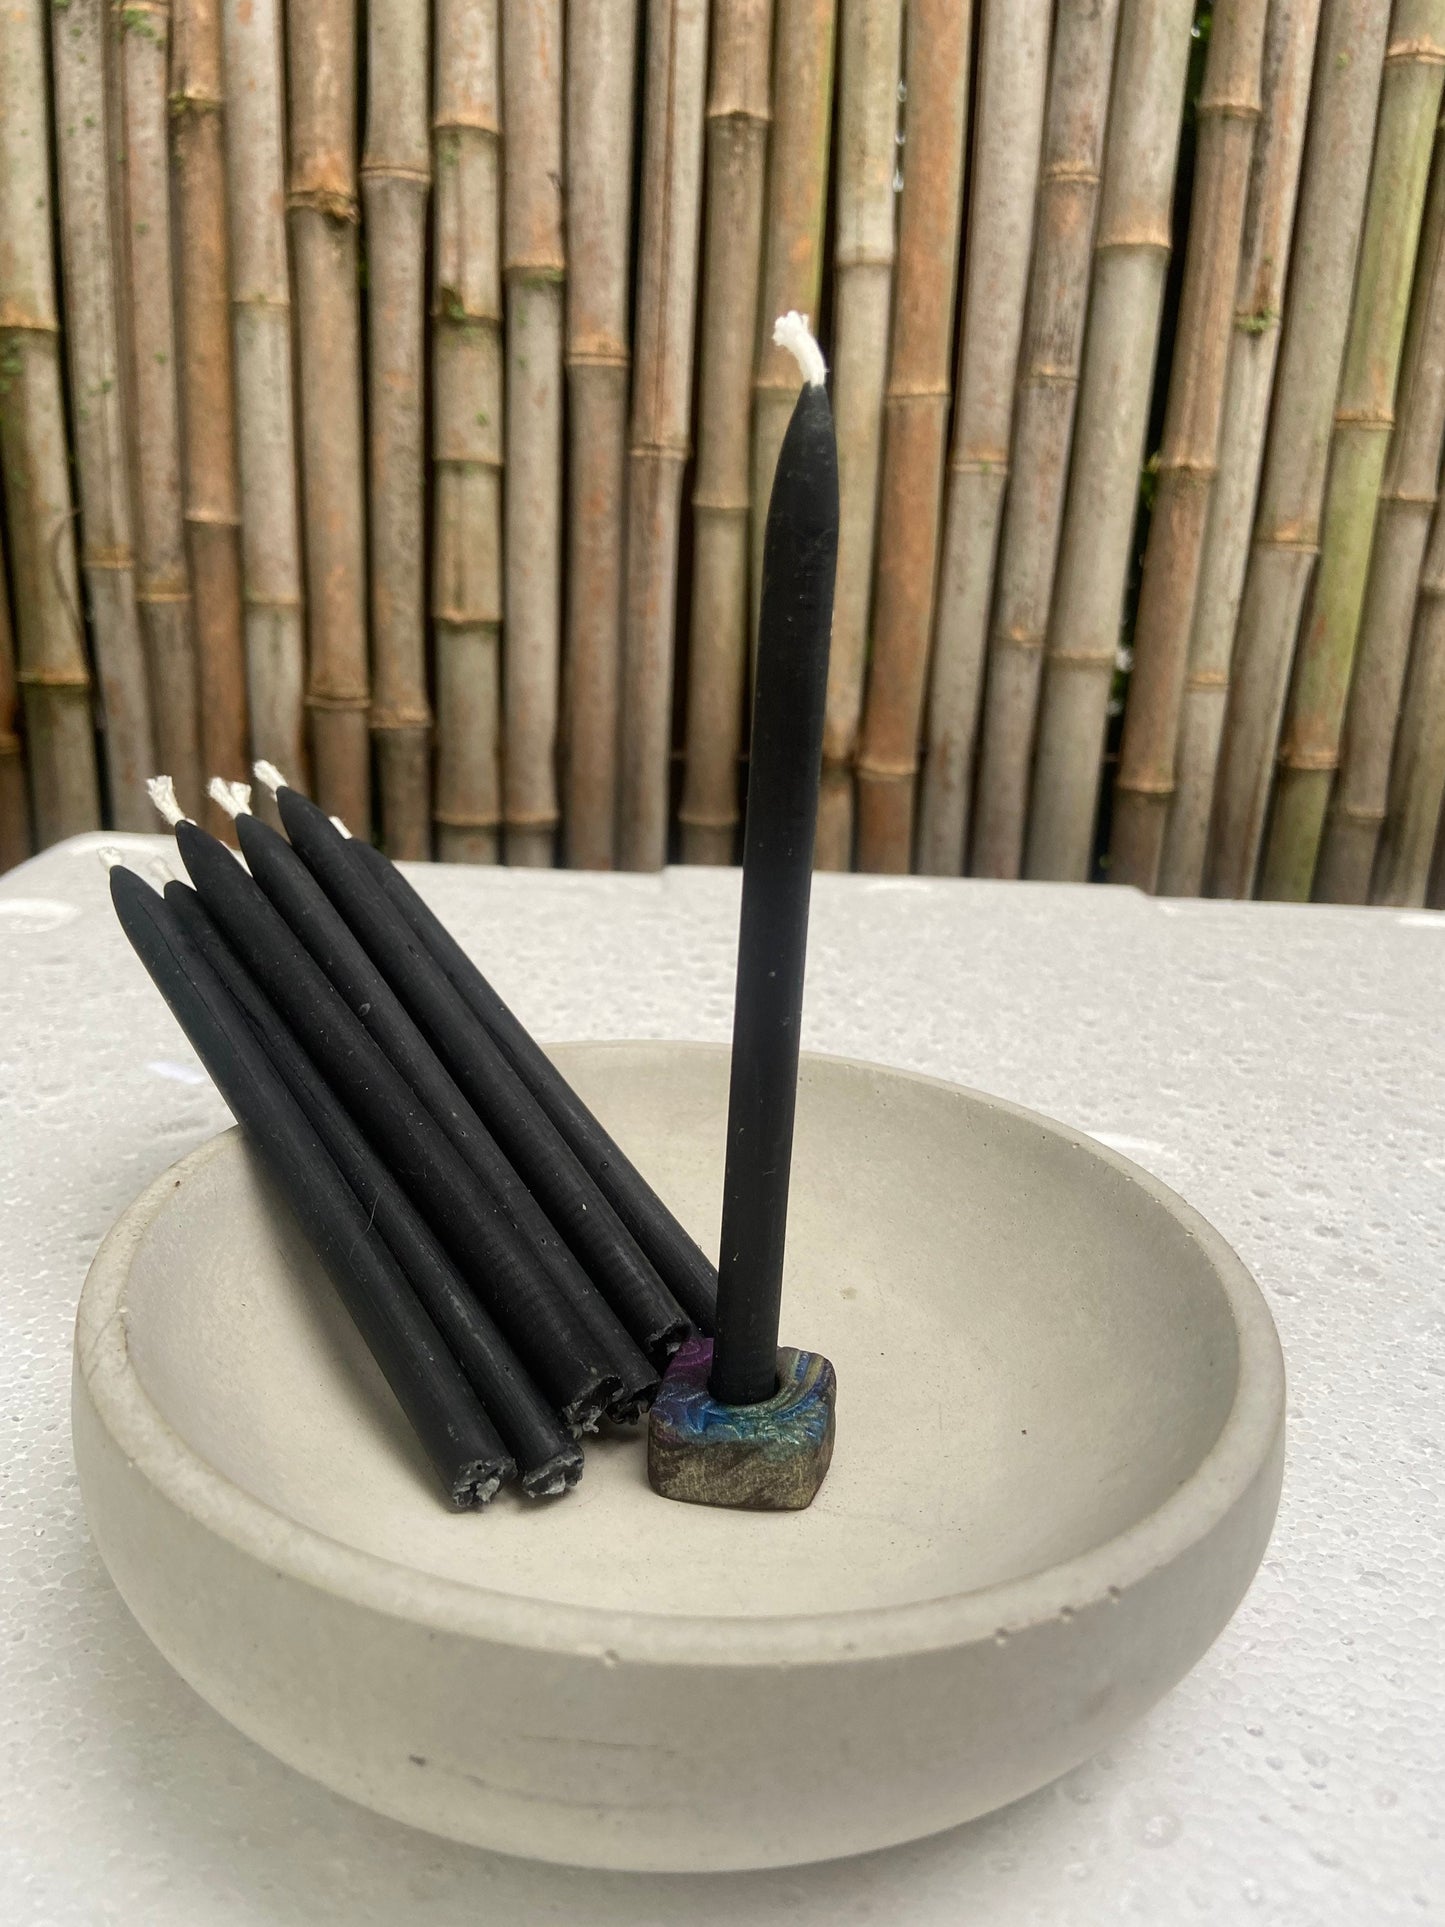 100% Pure Black Beeswax Tiny Taper Candles 5 inch - Birthday-Celebration-Meditation-Prayer-Tiny Tapers-Small Tapers-Mini Tapers-Set of 10